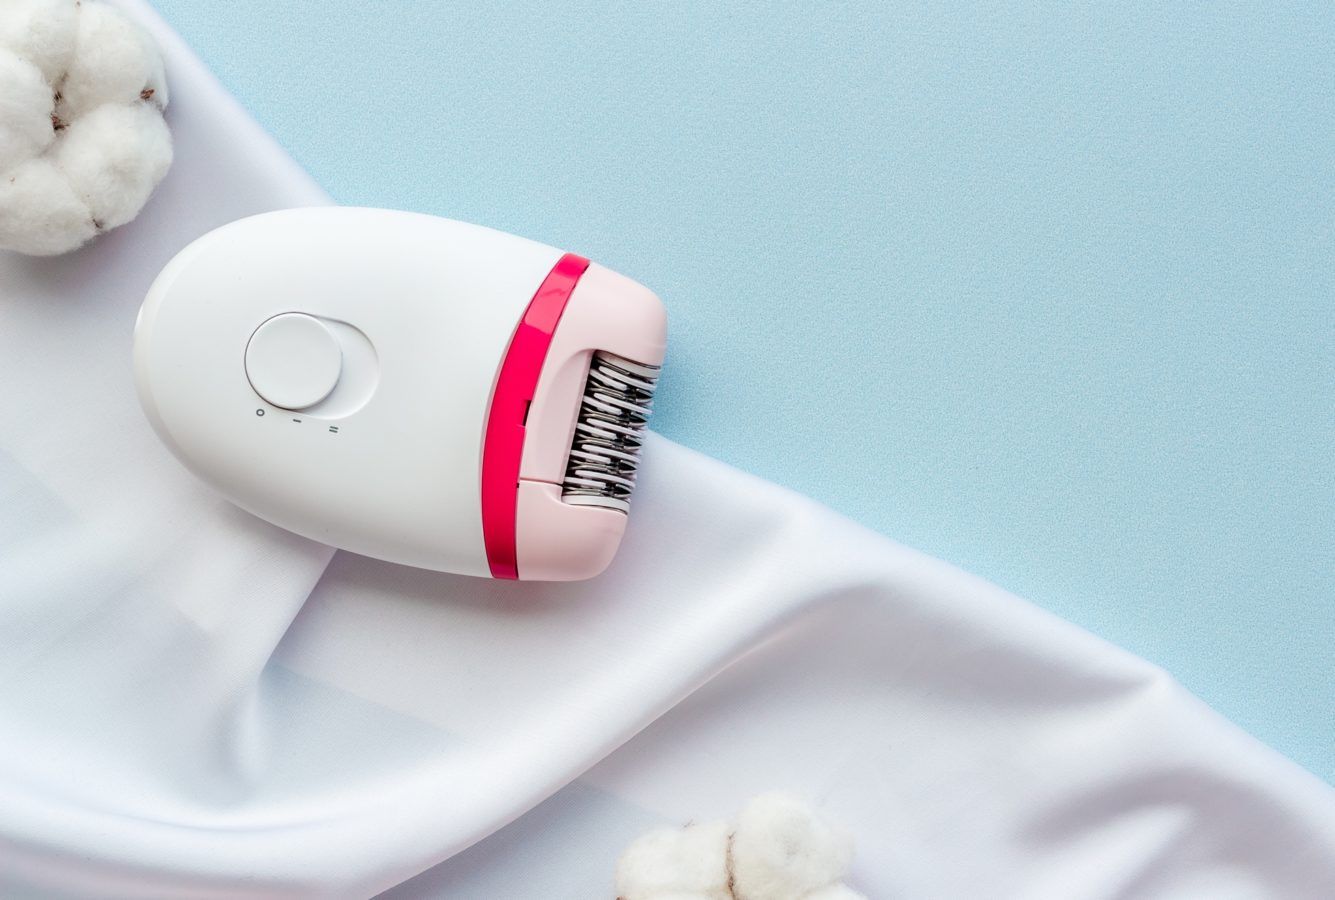 Get easy touch ups with these best epilators for hair removal